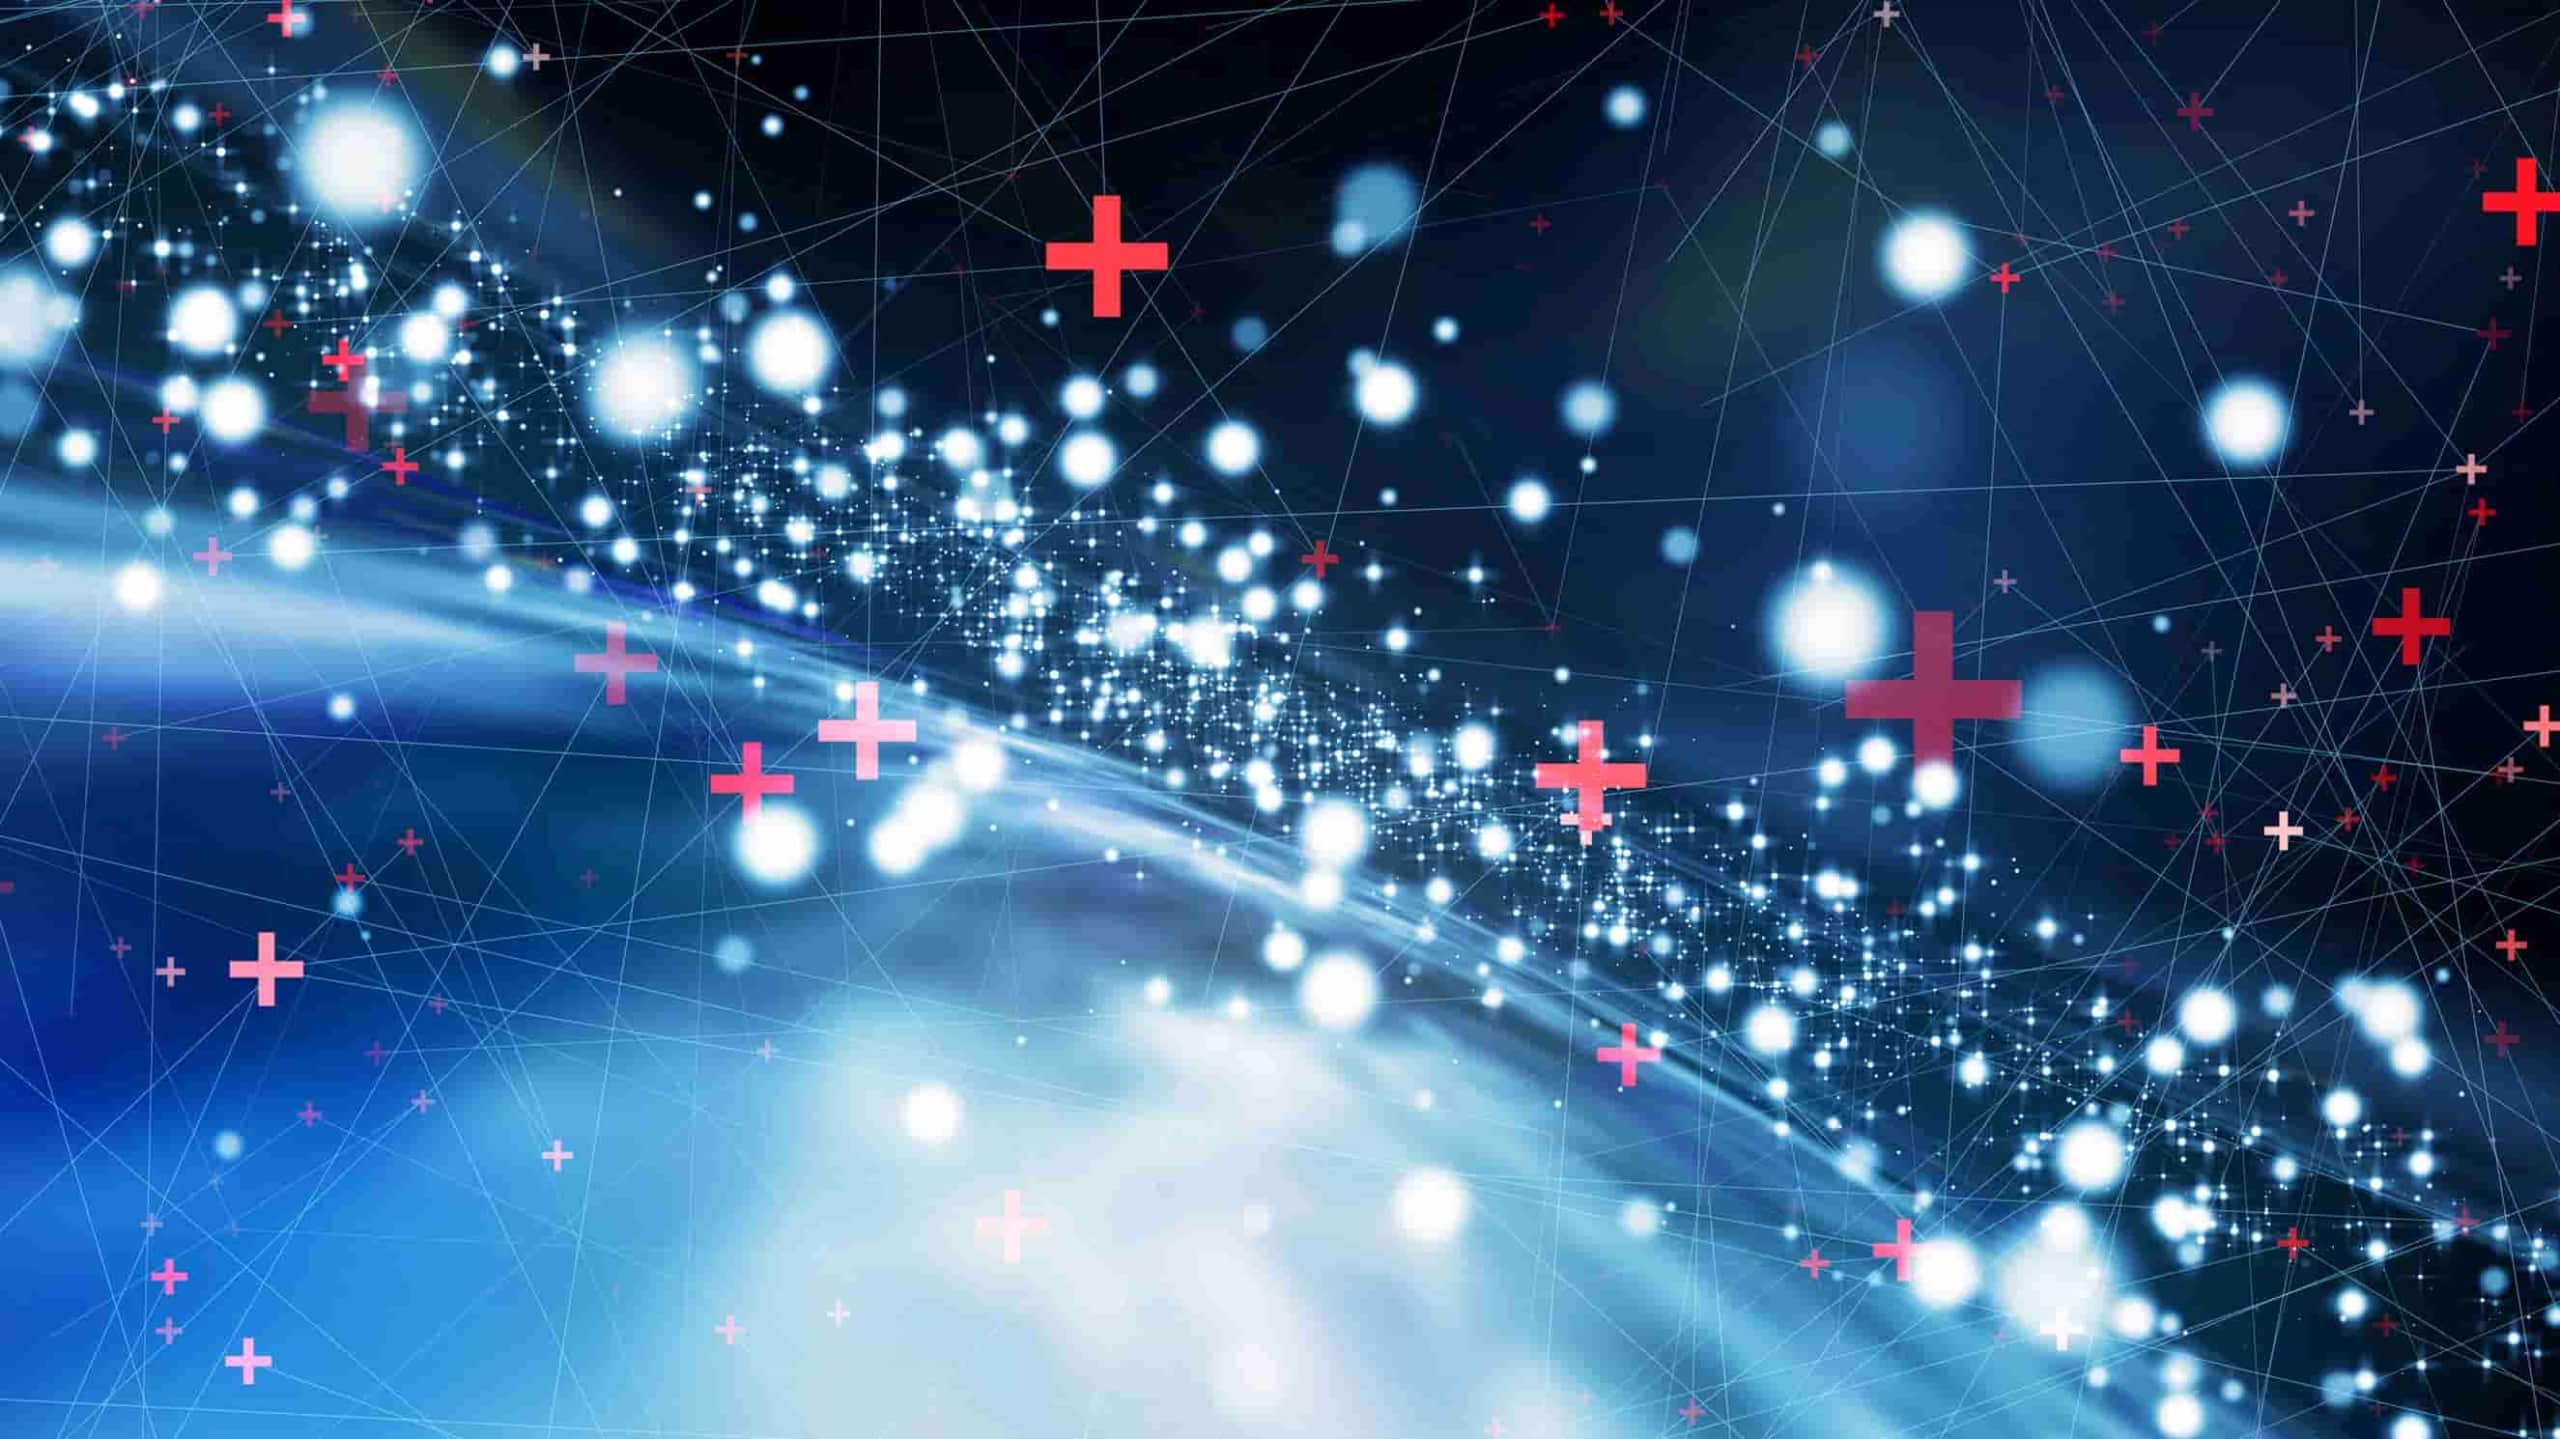 Abstract digital art of a network with nodes connected by lines against a blue-black background, highlighted with twinkling white lights and scattered red cross symbols.